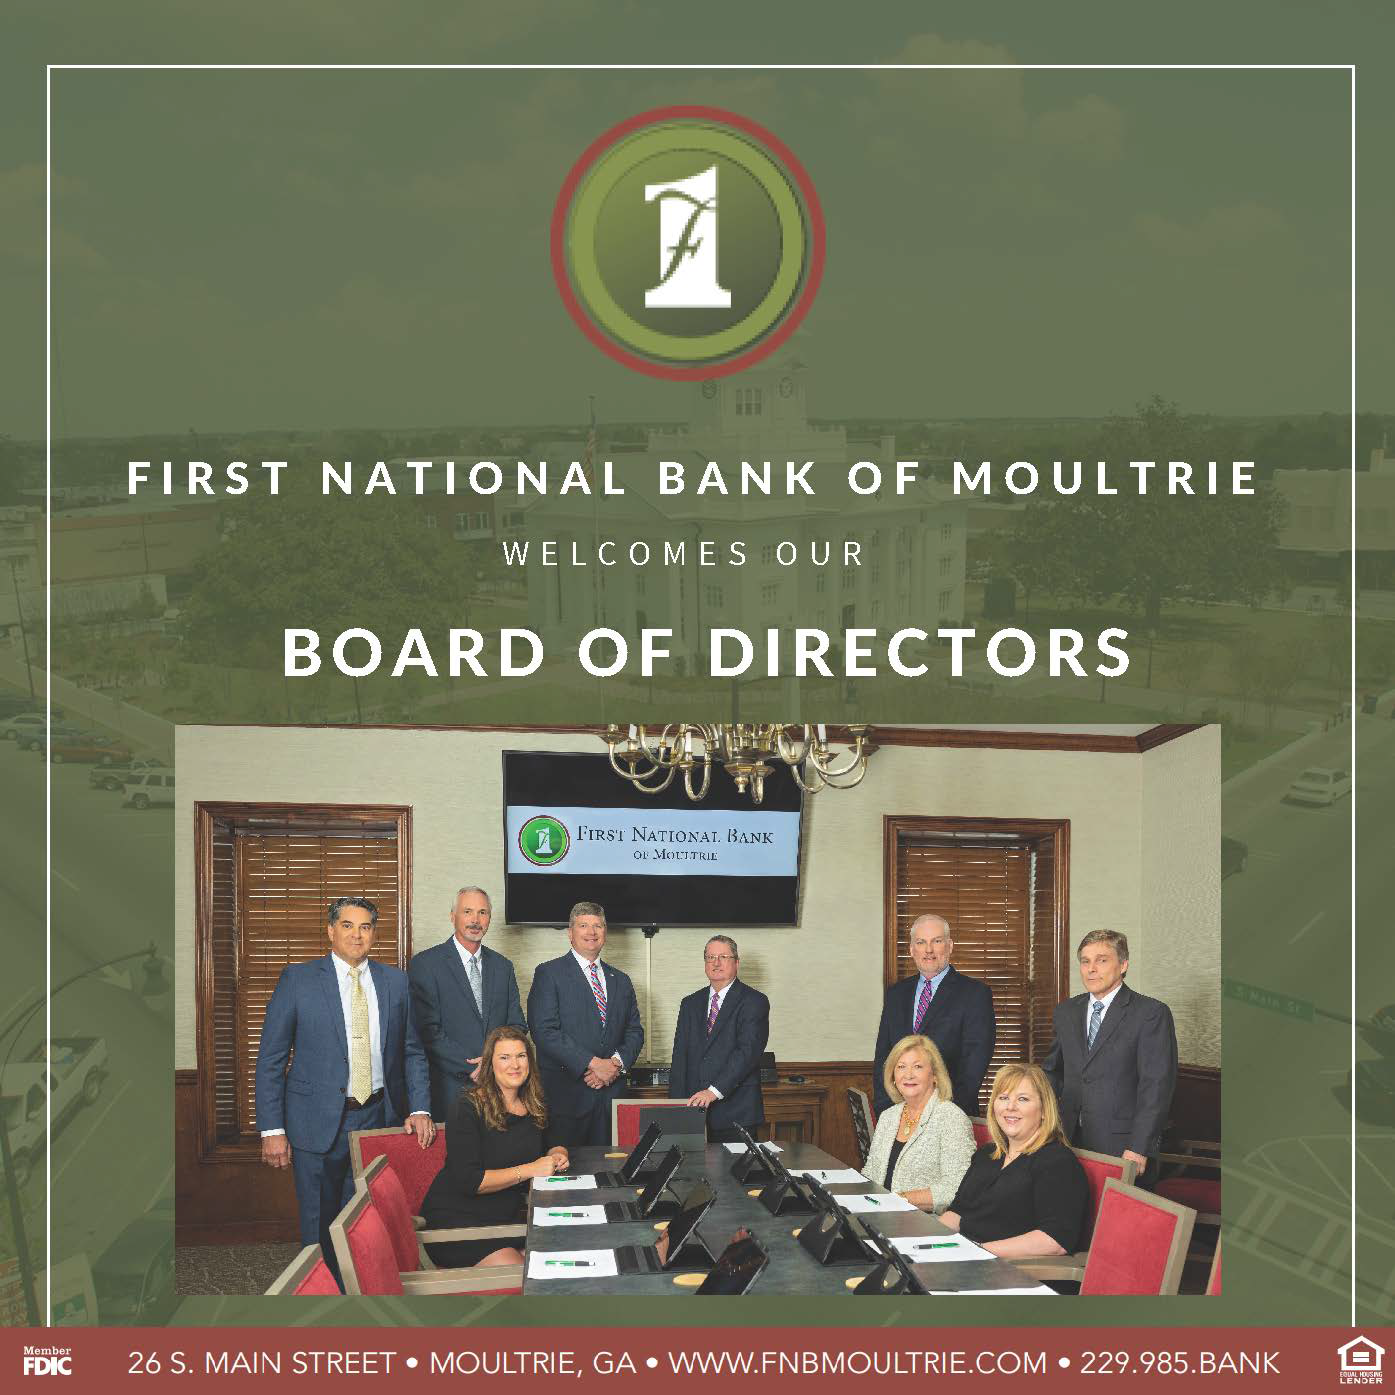 FNB of Moultrie Welcomes our Board of Directors